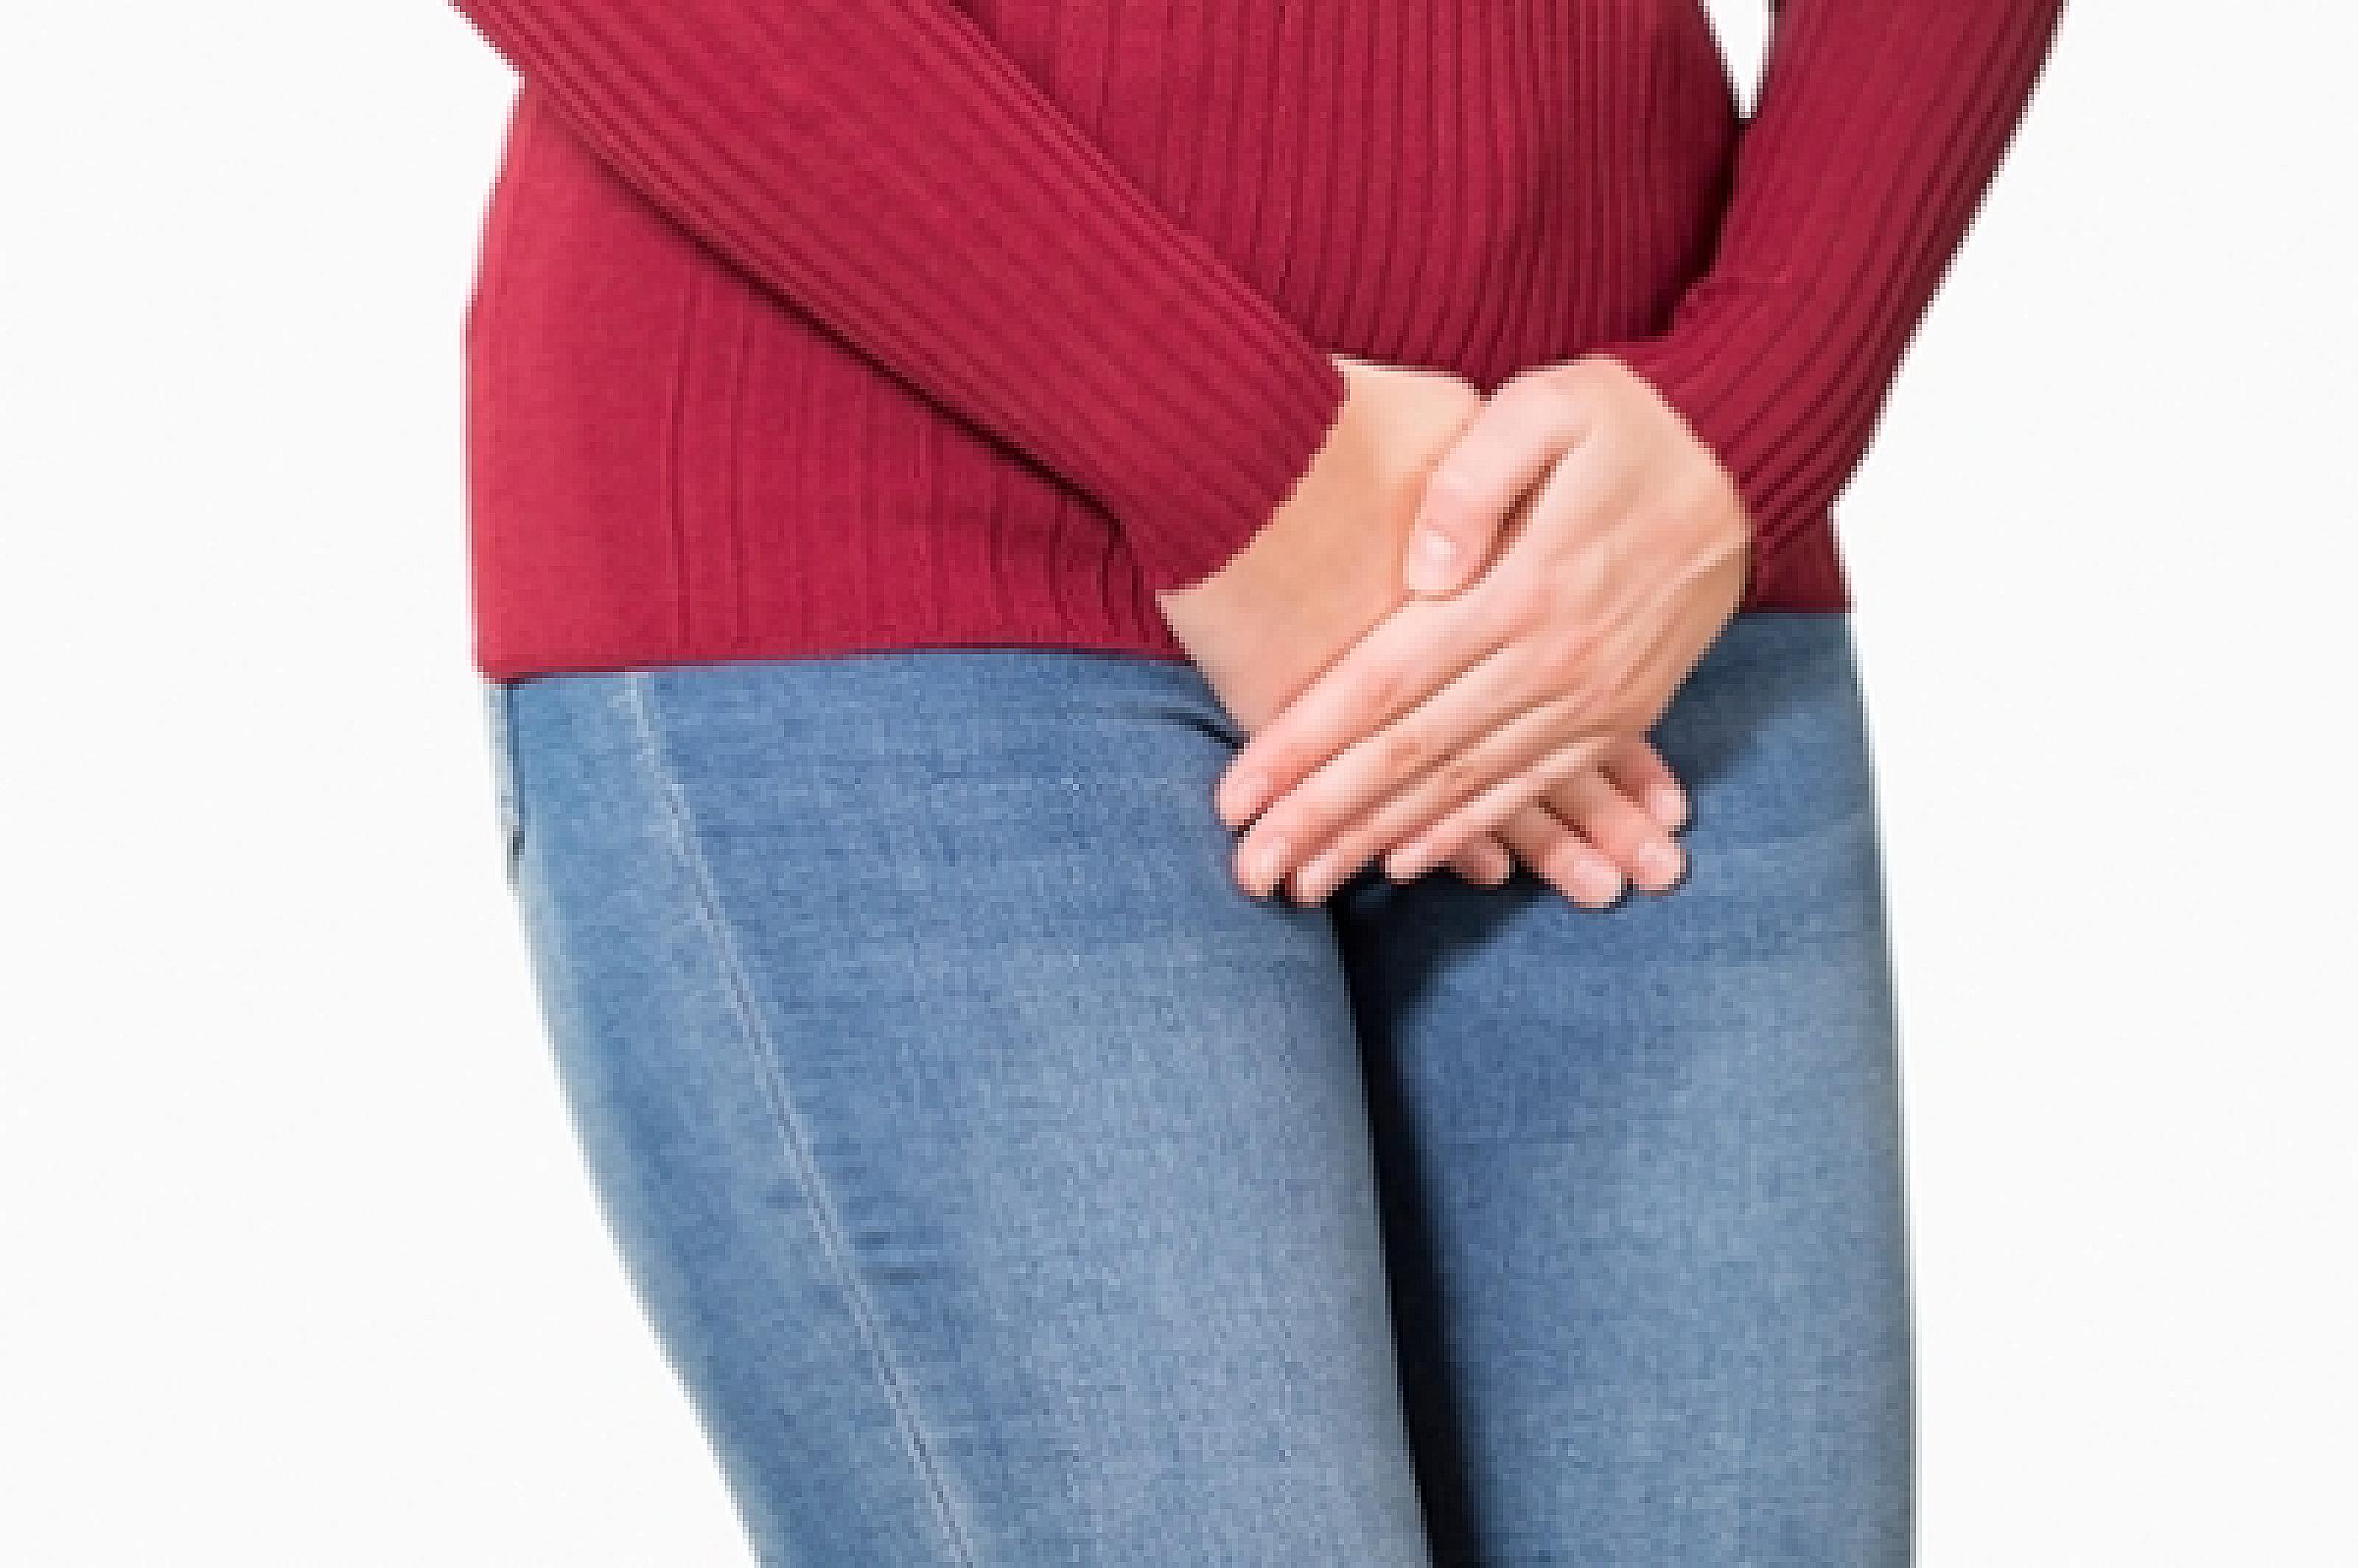 Woman experiencing urinary incontinence